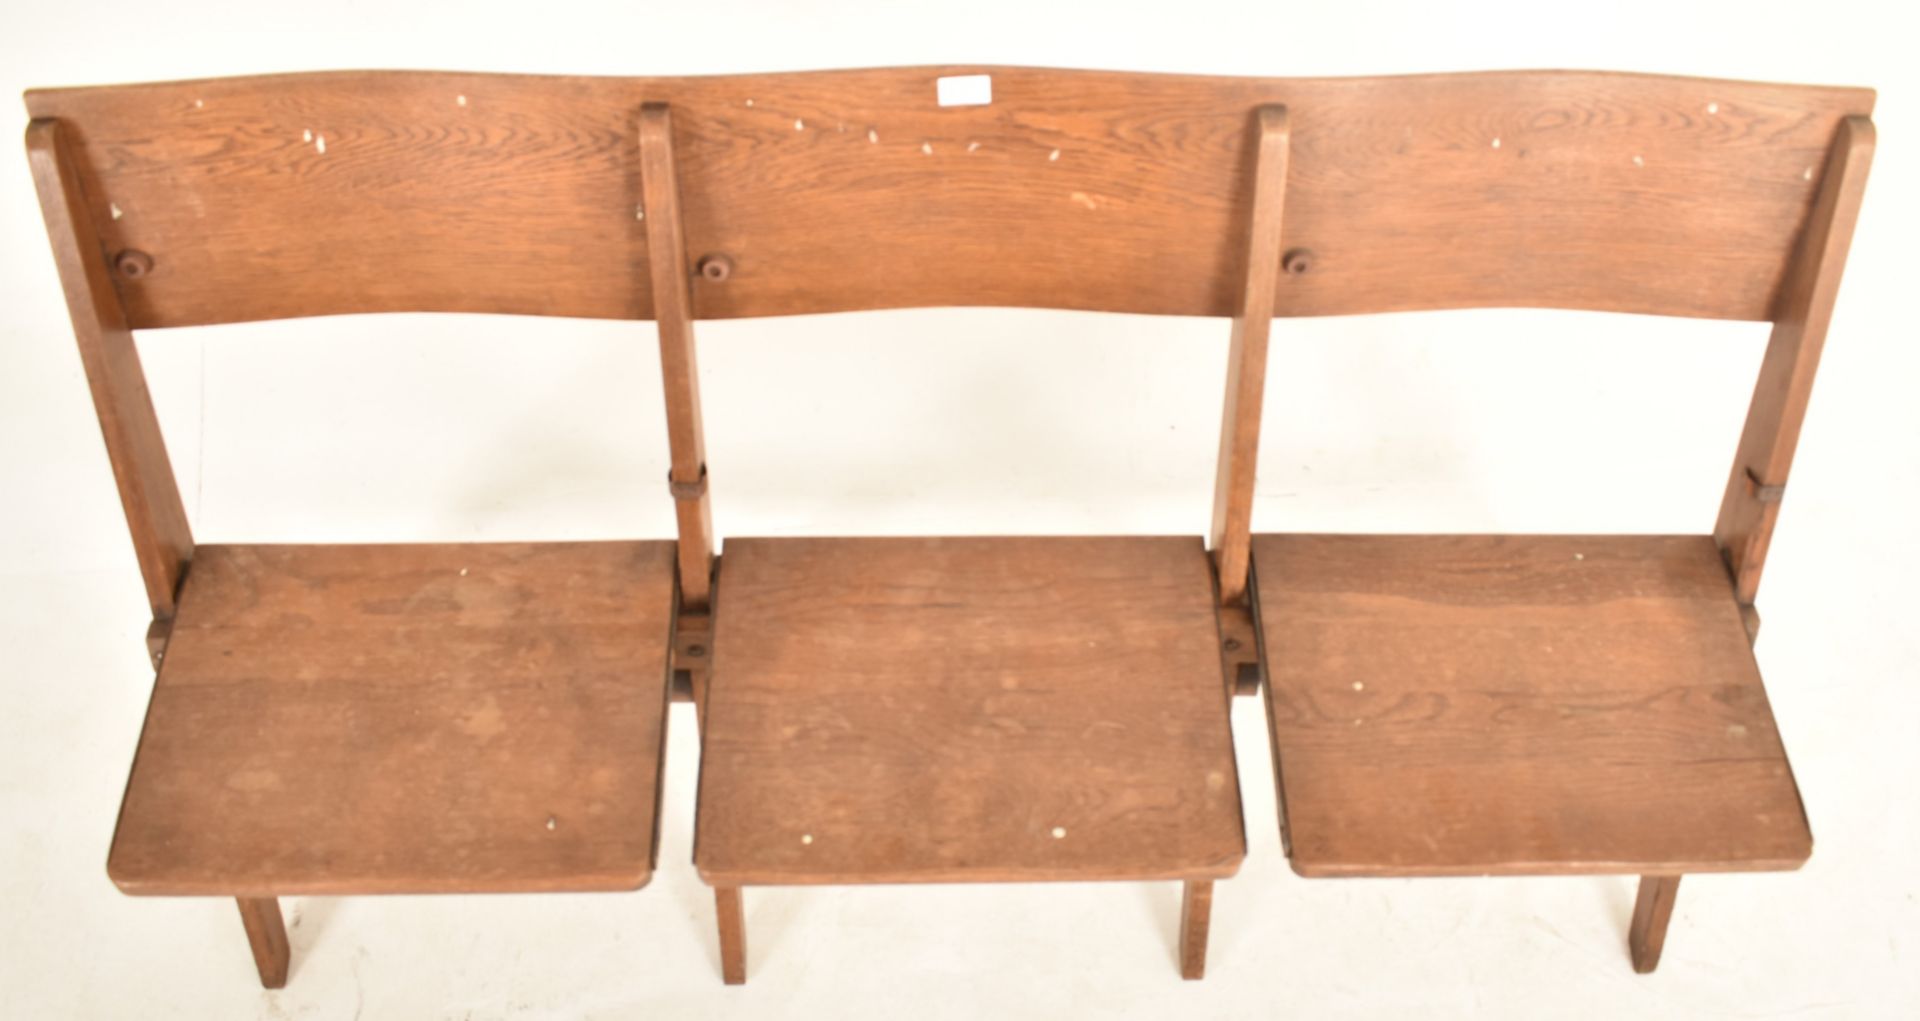 EARLY 20TH CENTURY 1920S ELM & OAK THEATRE THREE SEAT BENCH - Image 2 of 5